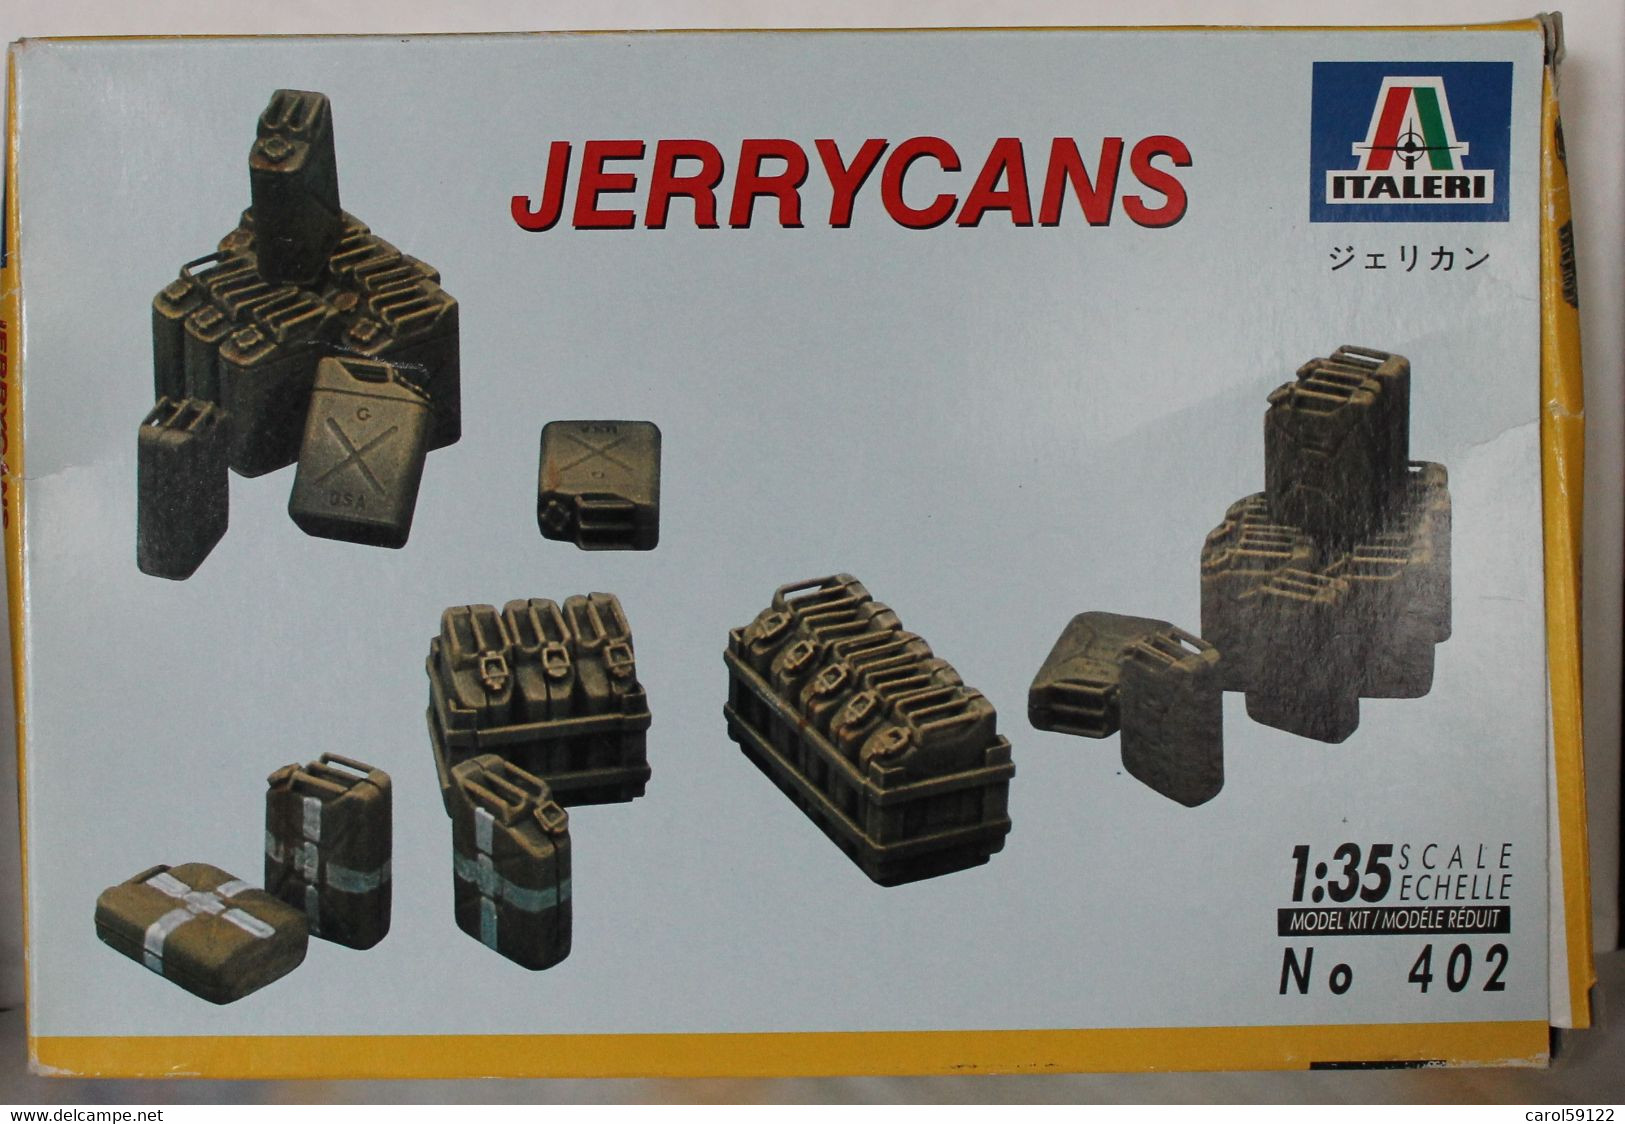 Maquette ITALERI 1/35 JERRYCANS - Army